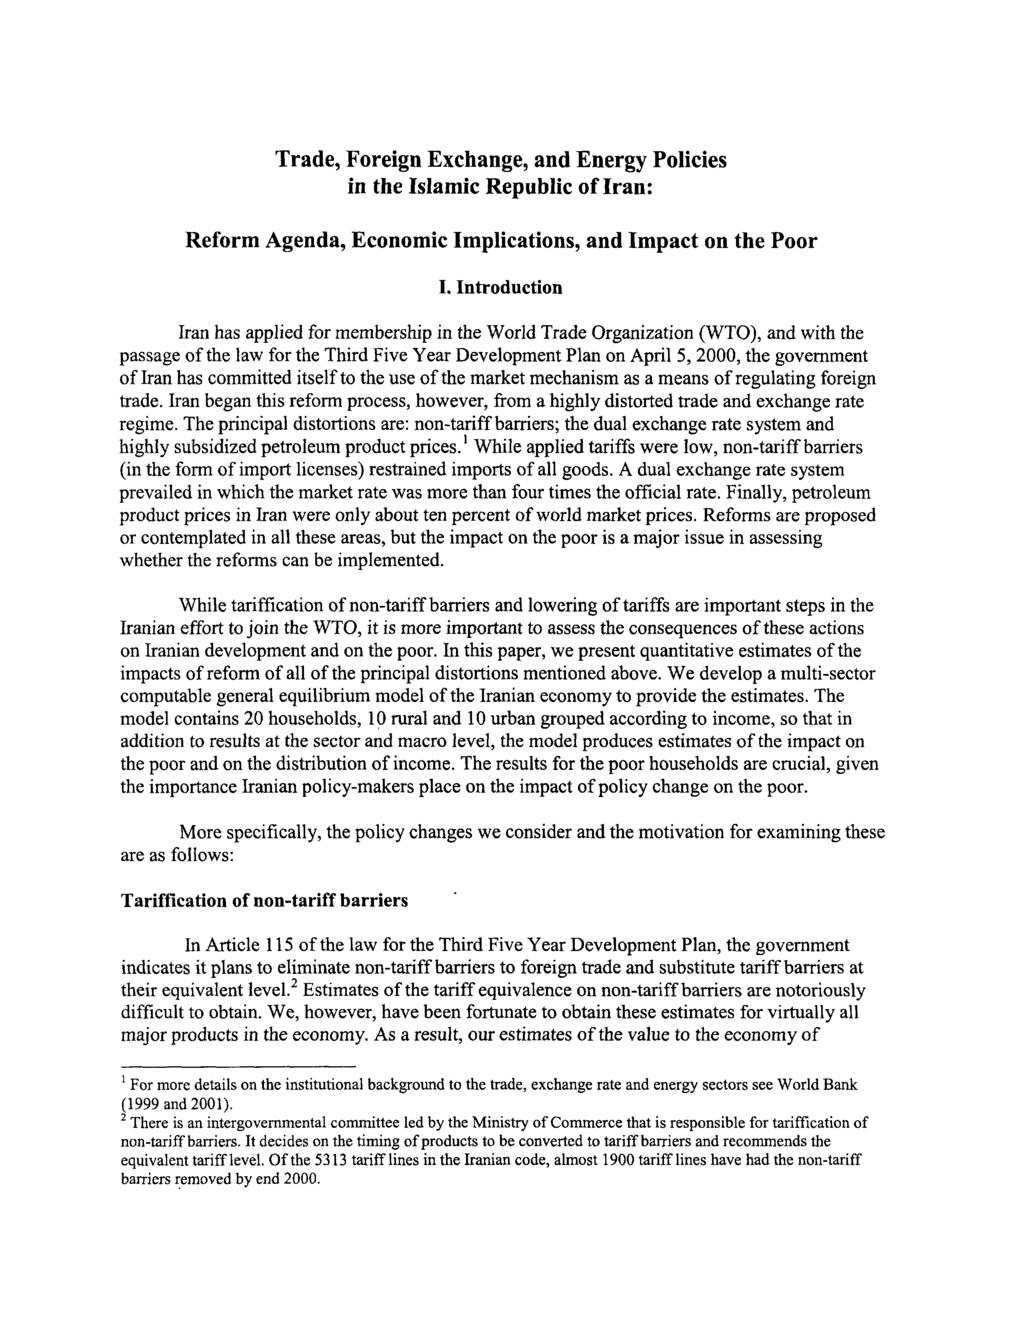 Trade, Foreign Exchange, and Energy Policies in the Islamic Republic of Iran: Reform Agenda, Economic Implications, and Impact on the Poor I.